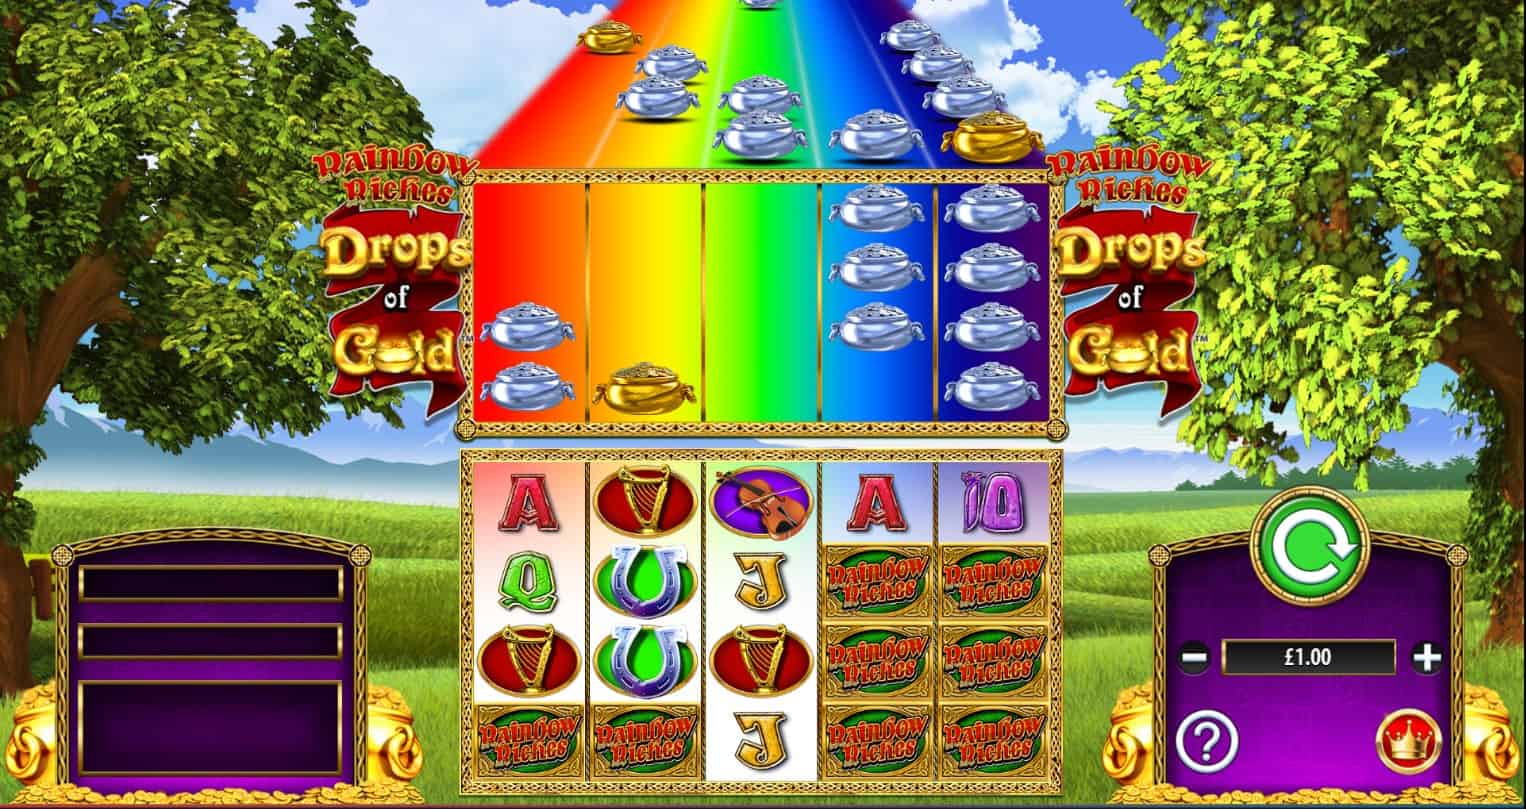 Rainbow Riches Drops of Gold Game Review